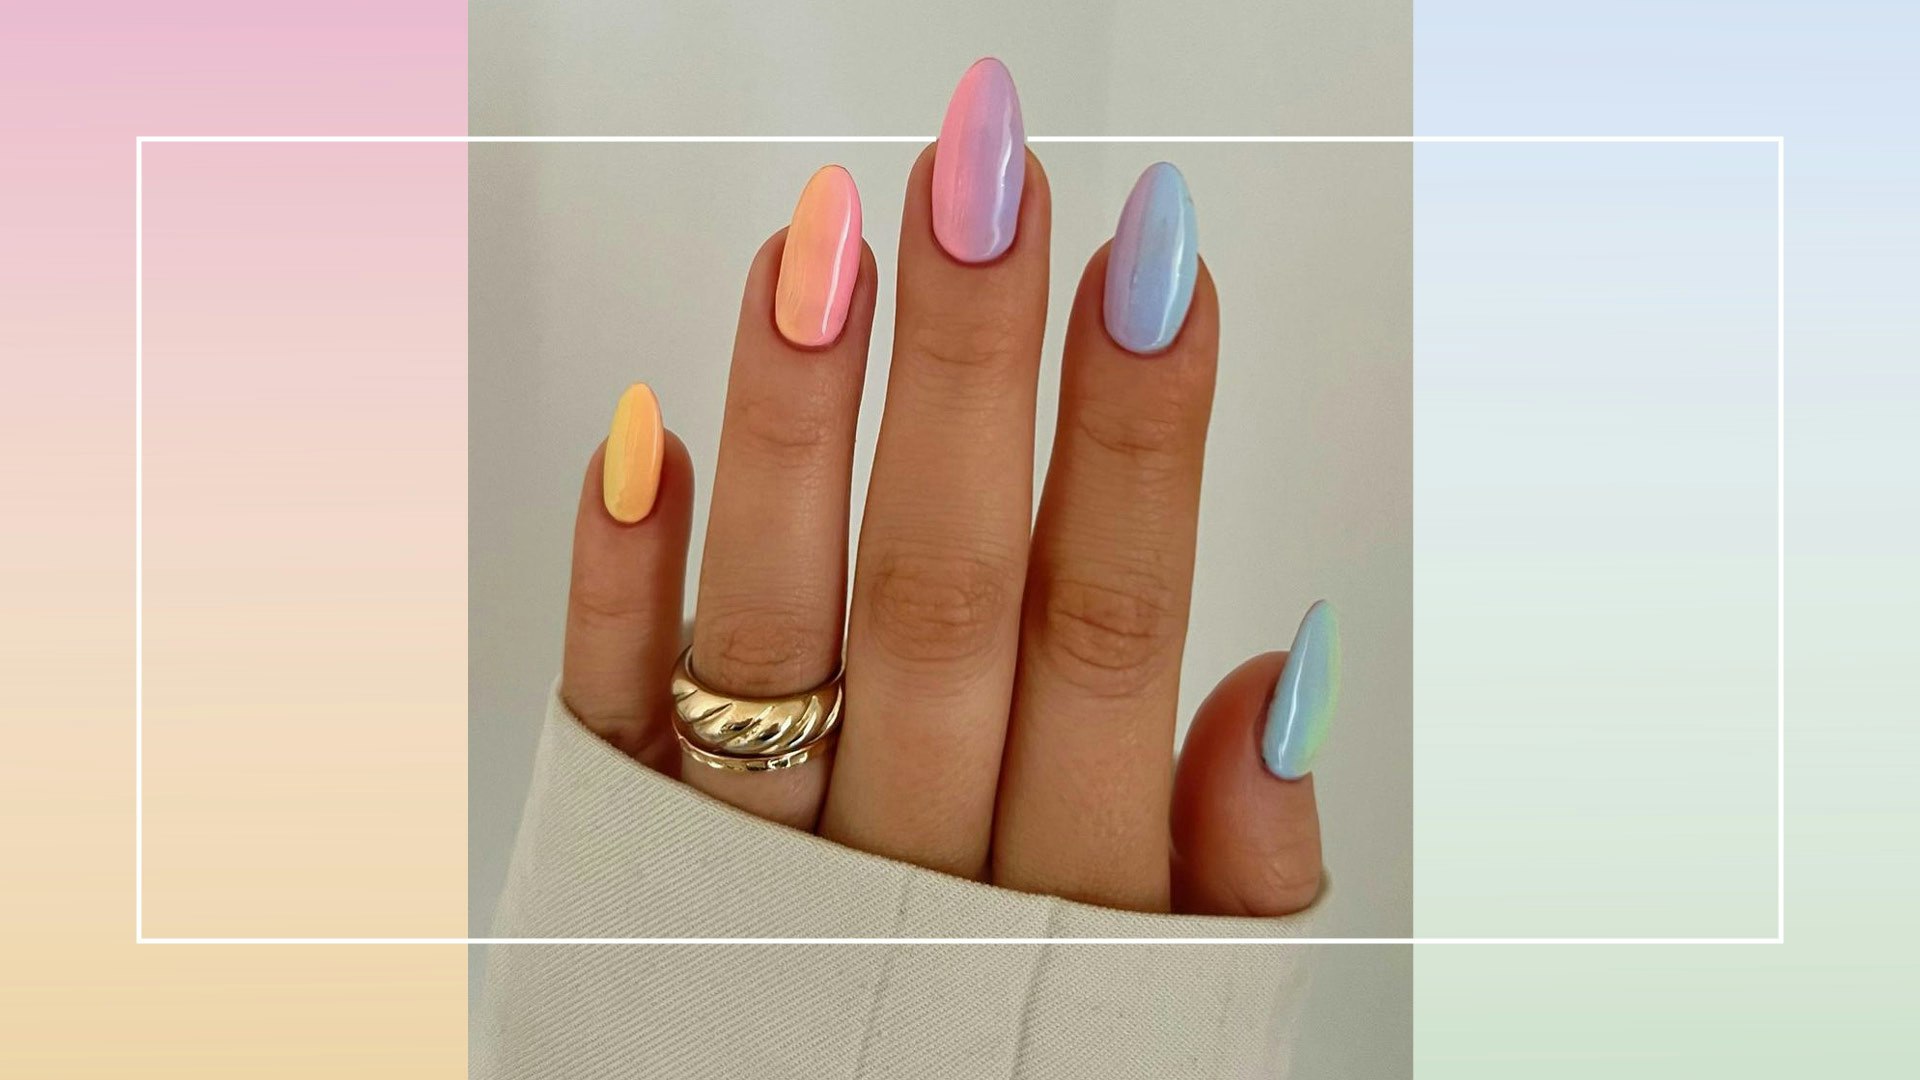 2. "Trendy Almond Nail Designs for Tumblr" - wide 8